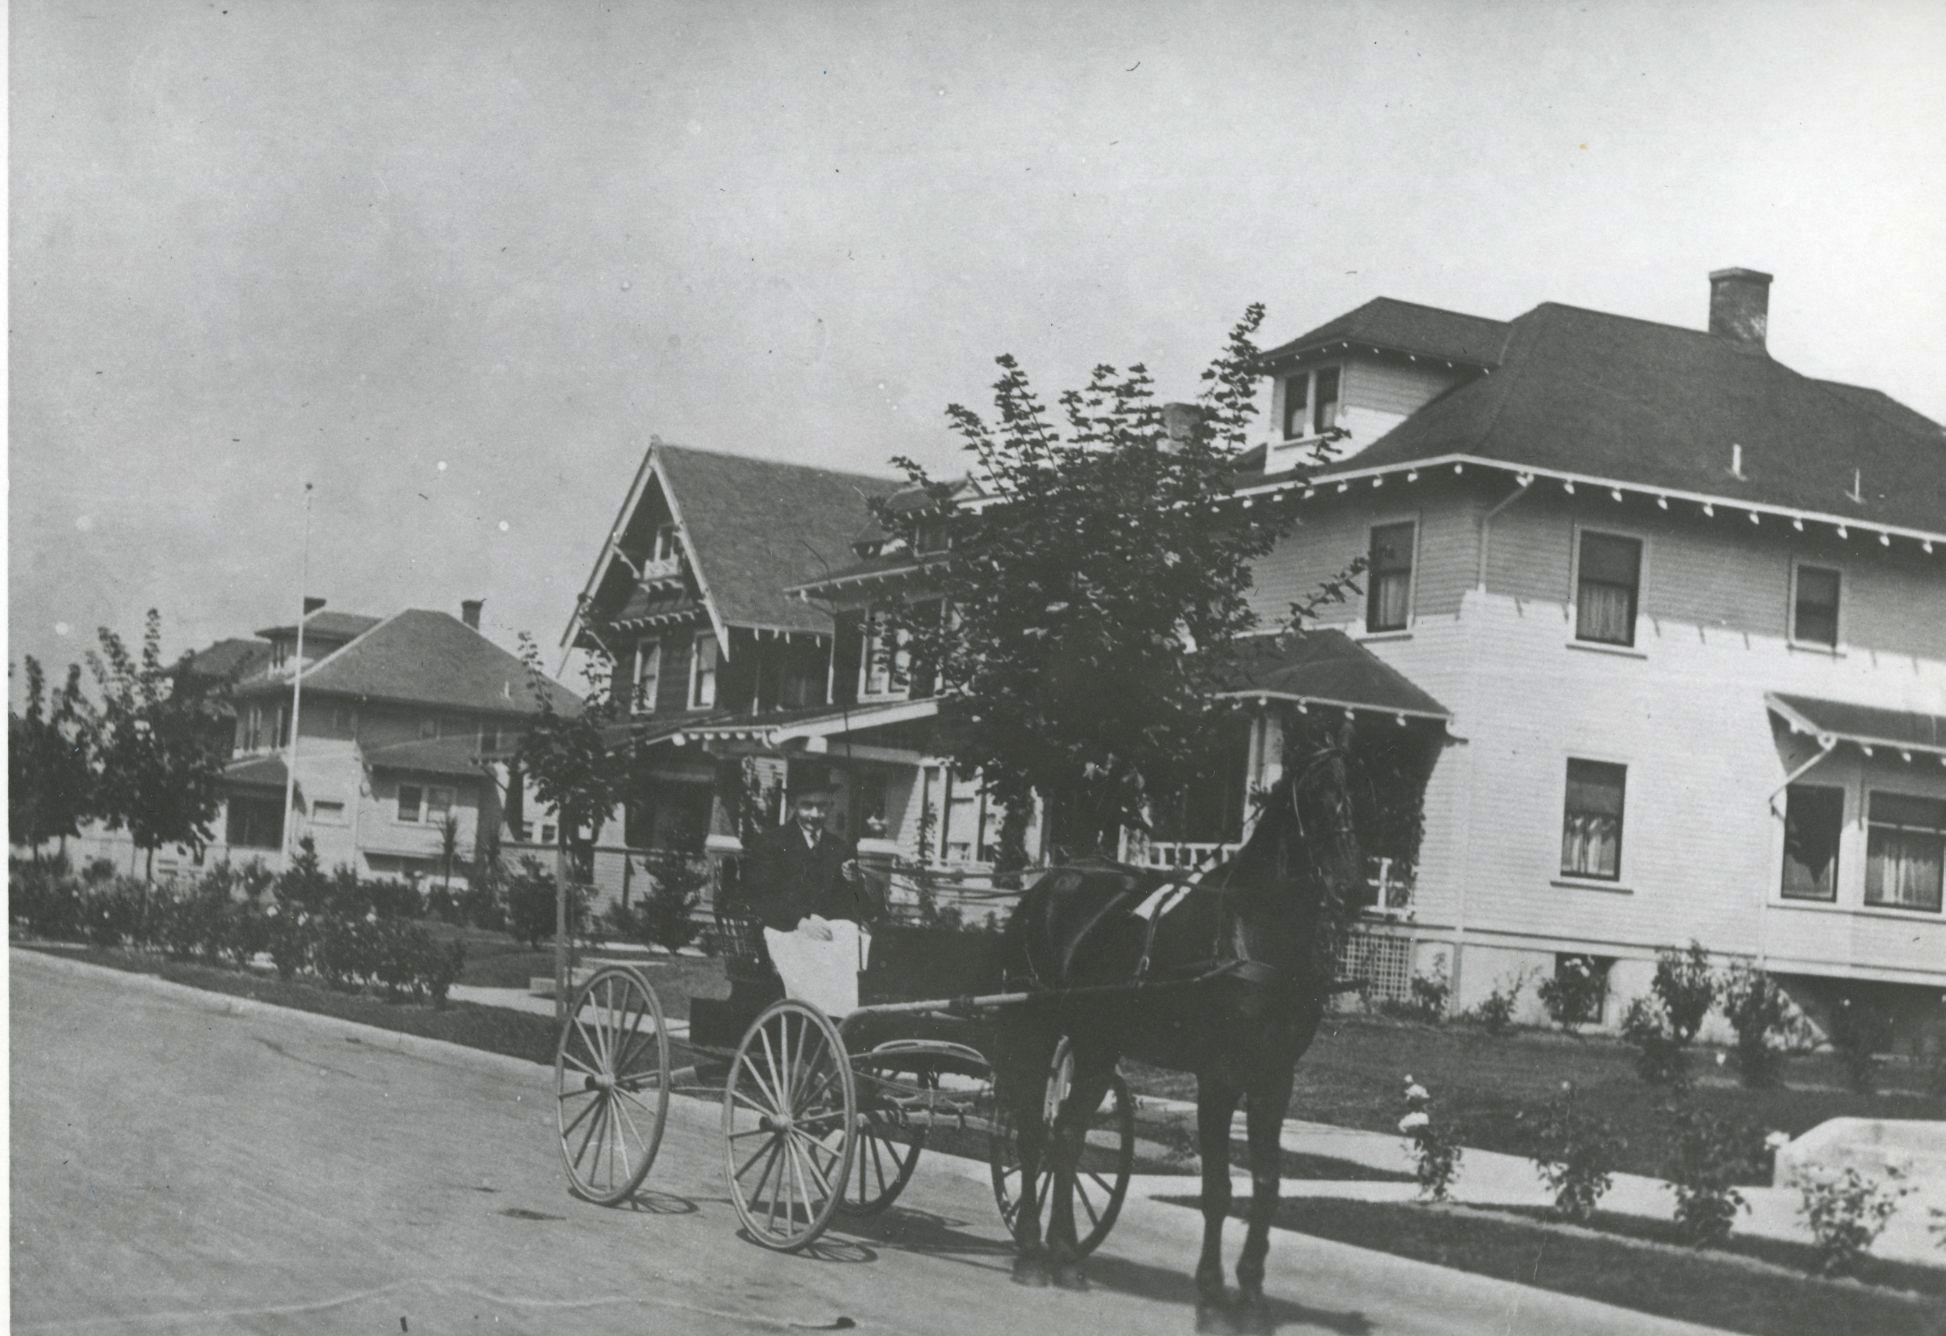 Vintage horse drawn carrige in the Ladd